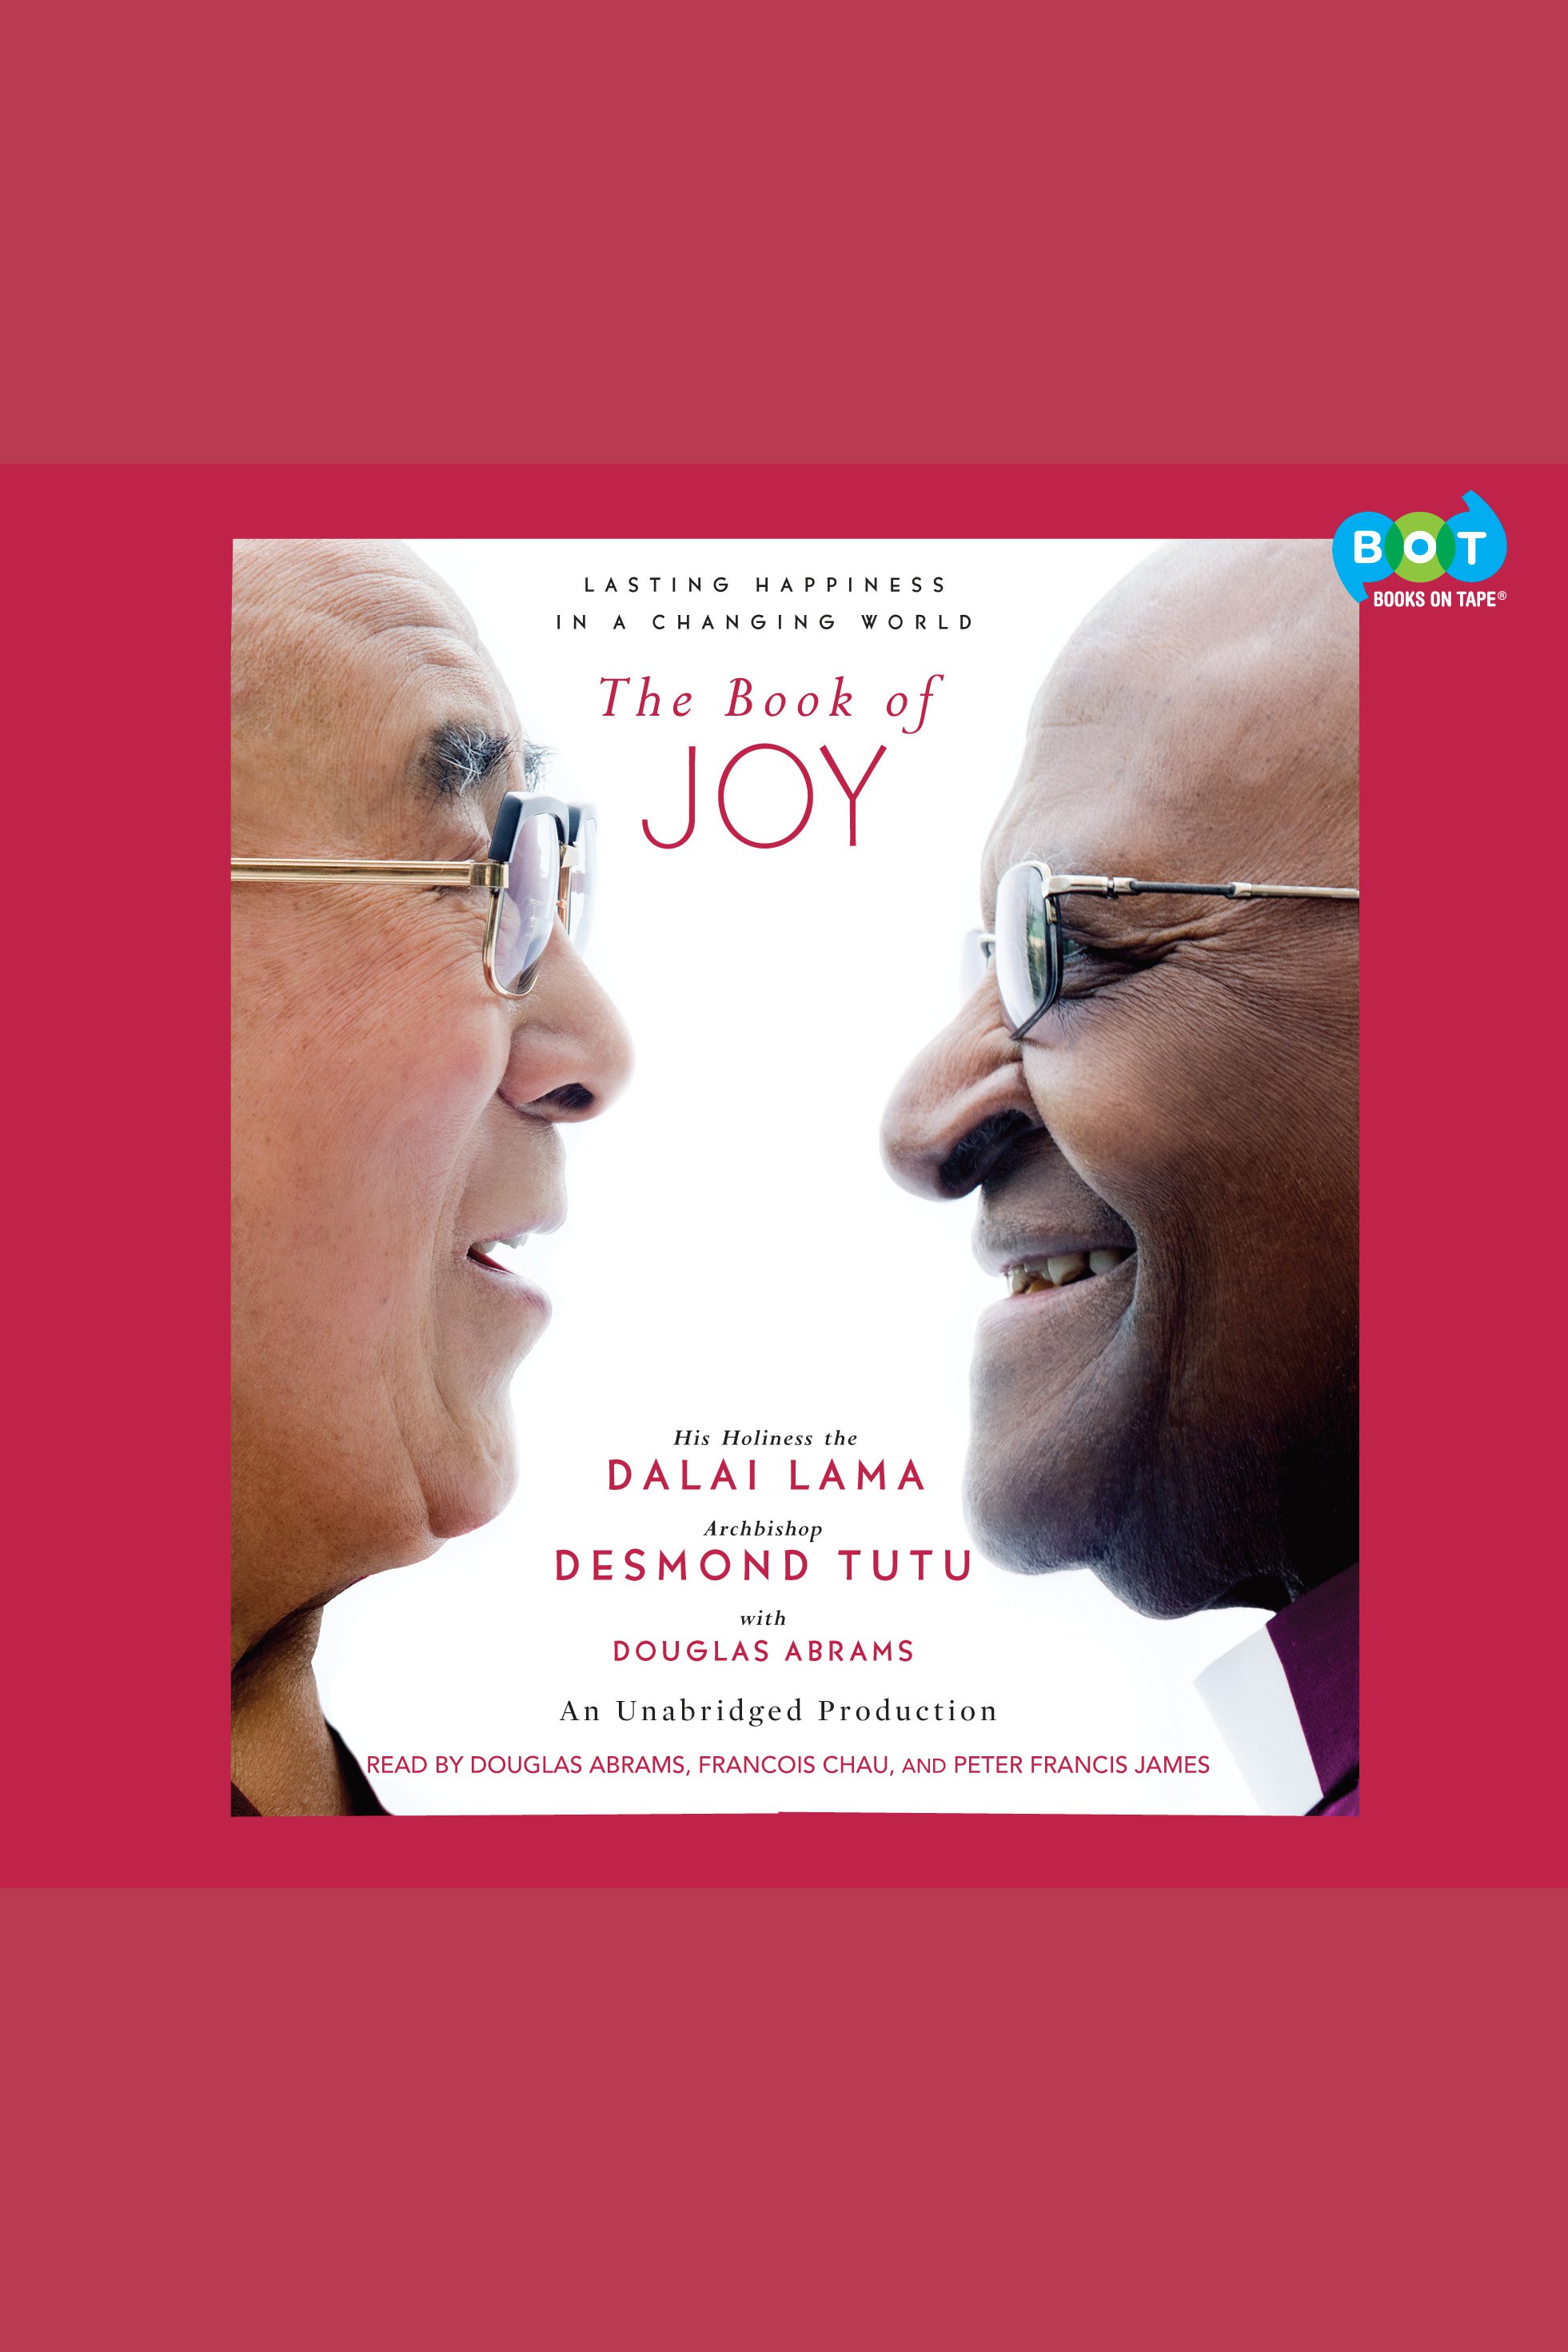 The book of joy lasting happiness in a changing world cover image